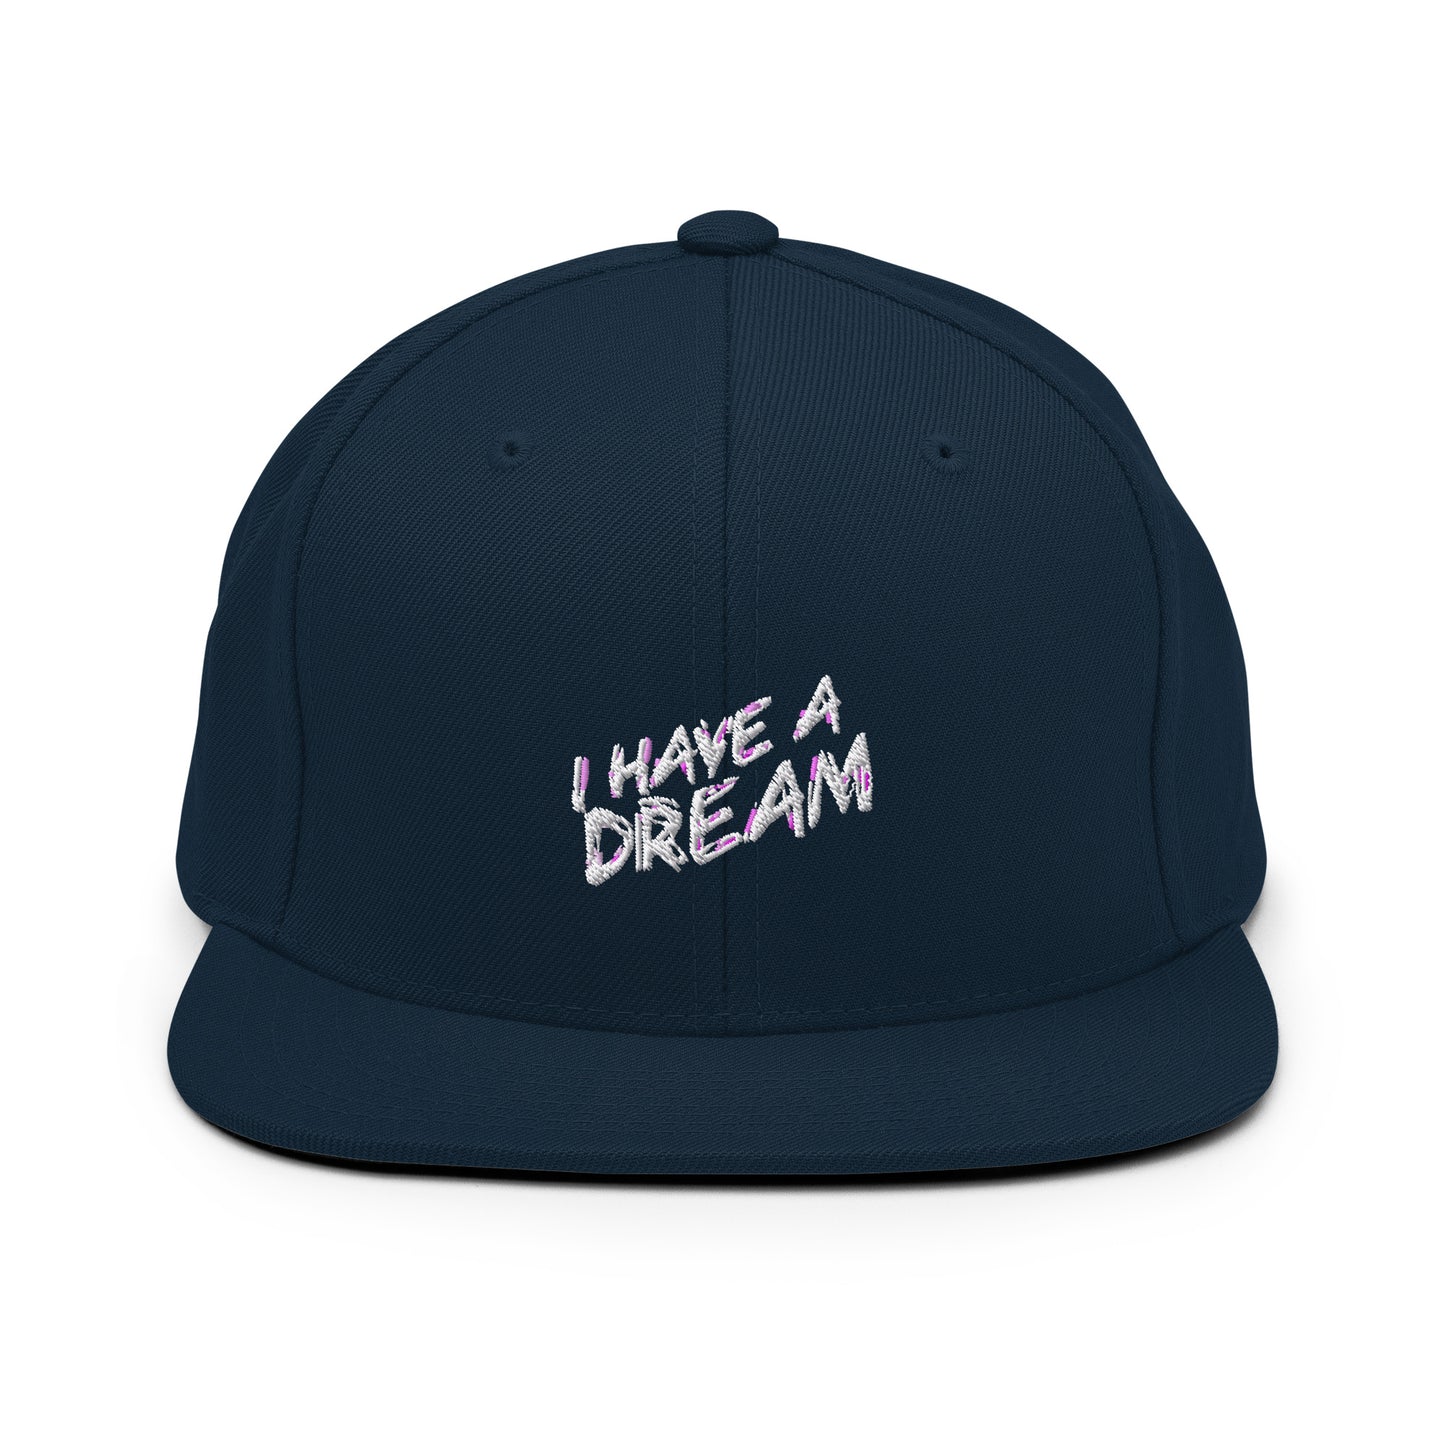 I have a Dream - Snapback Hat